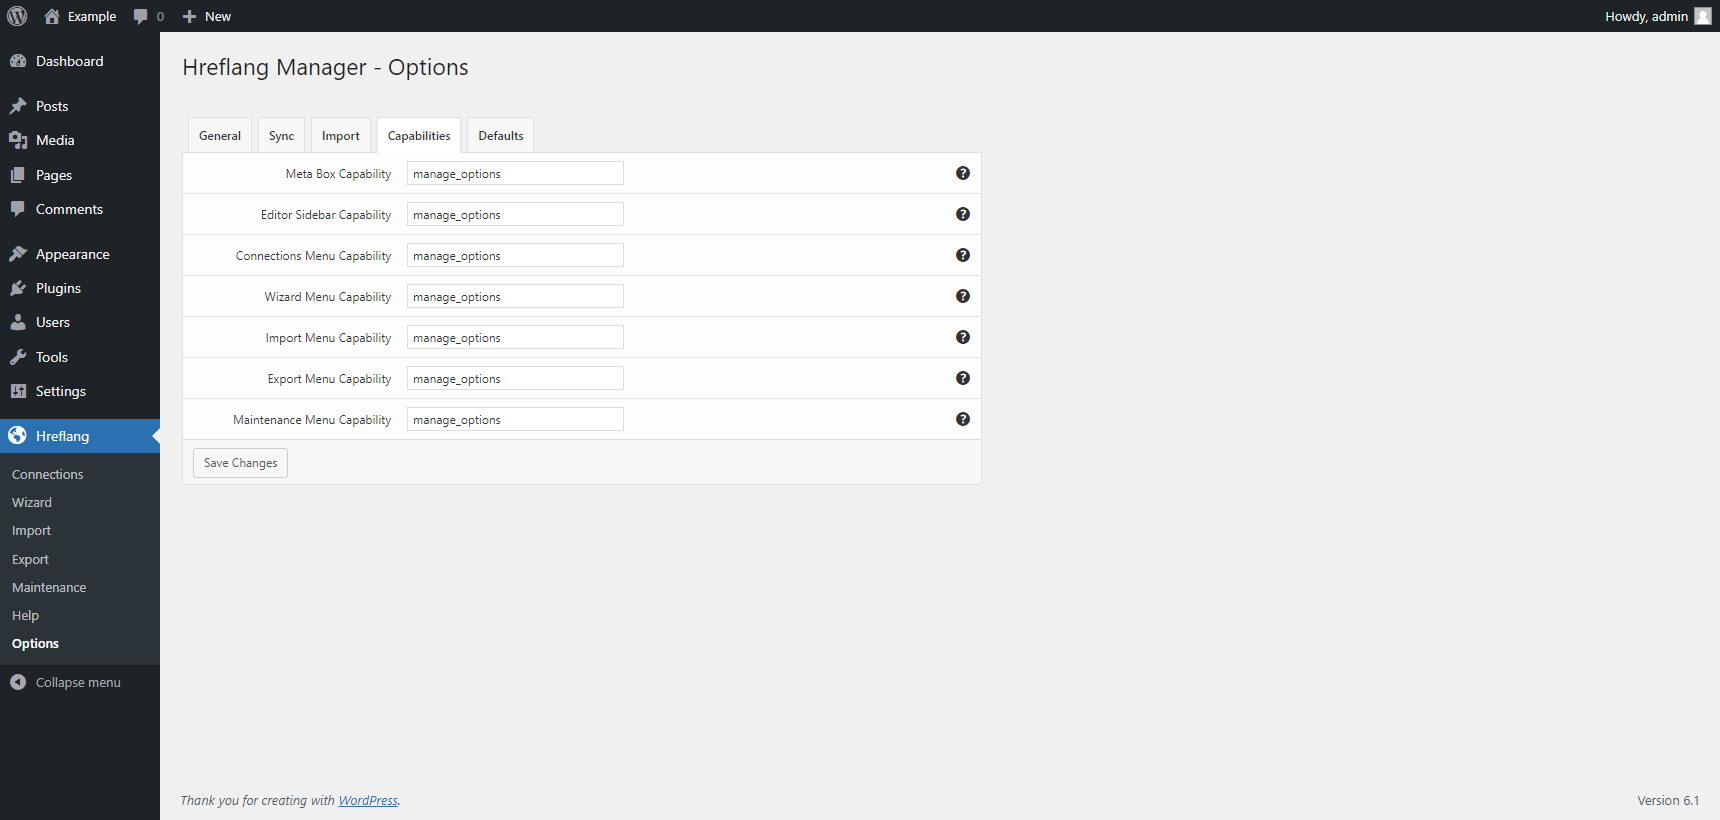 "Capabilities" tab in the plugin options of the Hreflang Manager plugin for WordPress.